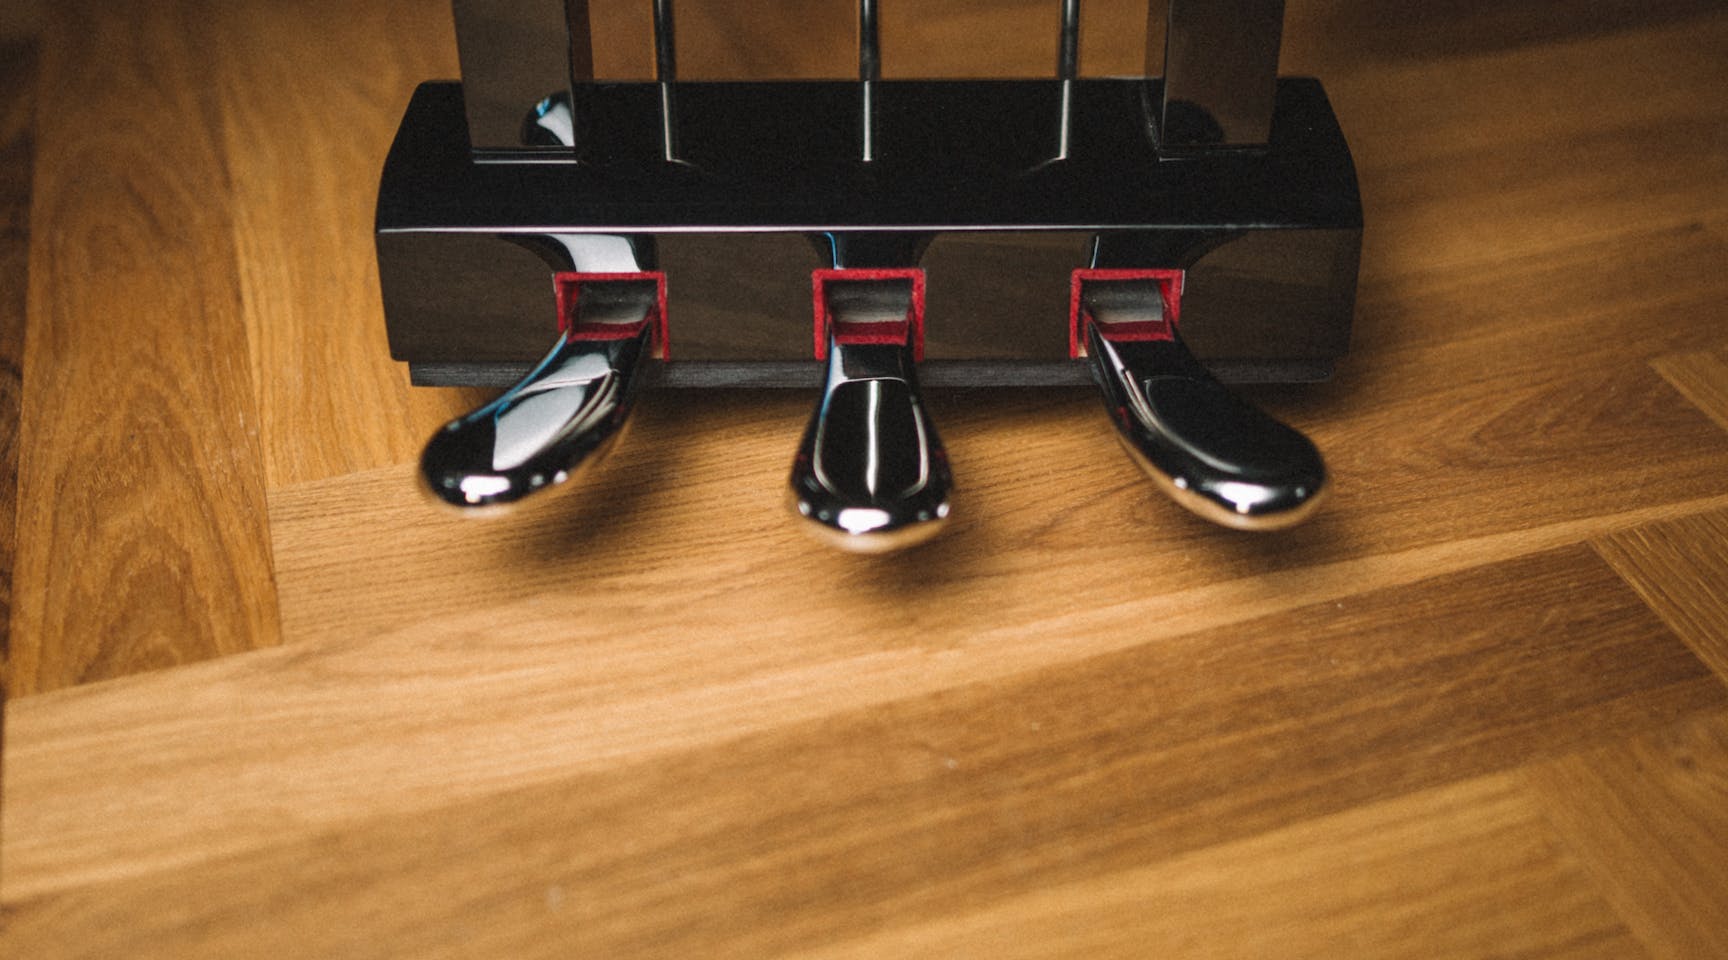 How Do You Know When To Press the Pedals On the Piano?